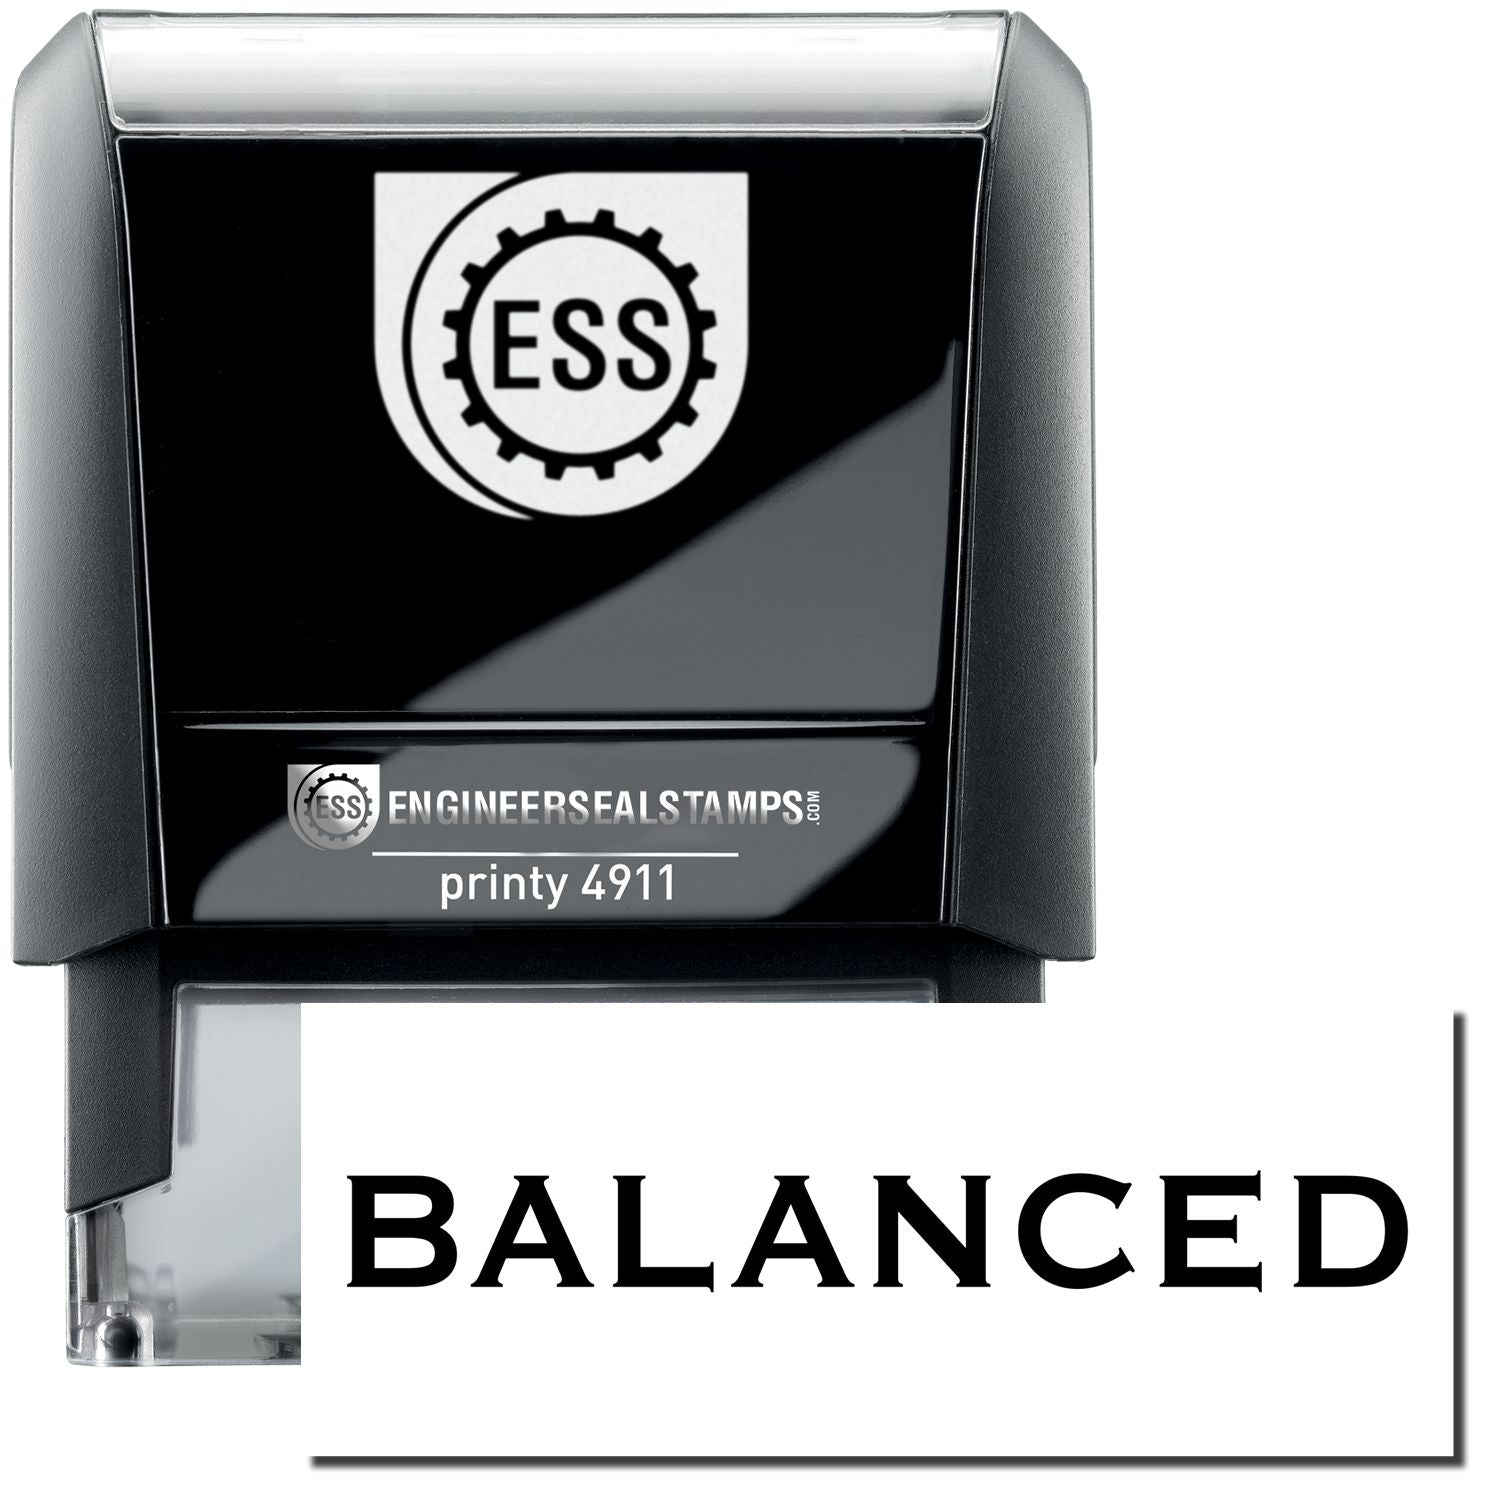 A self-inking stamp with a stamped image showing how the text "BALANCED" is displayed after stamping.